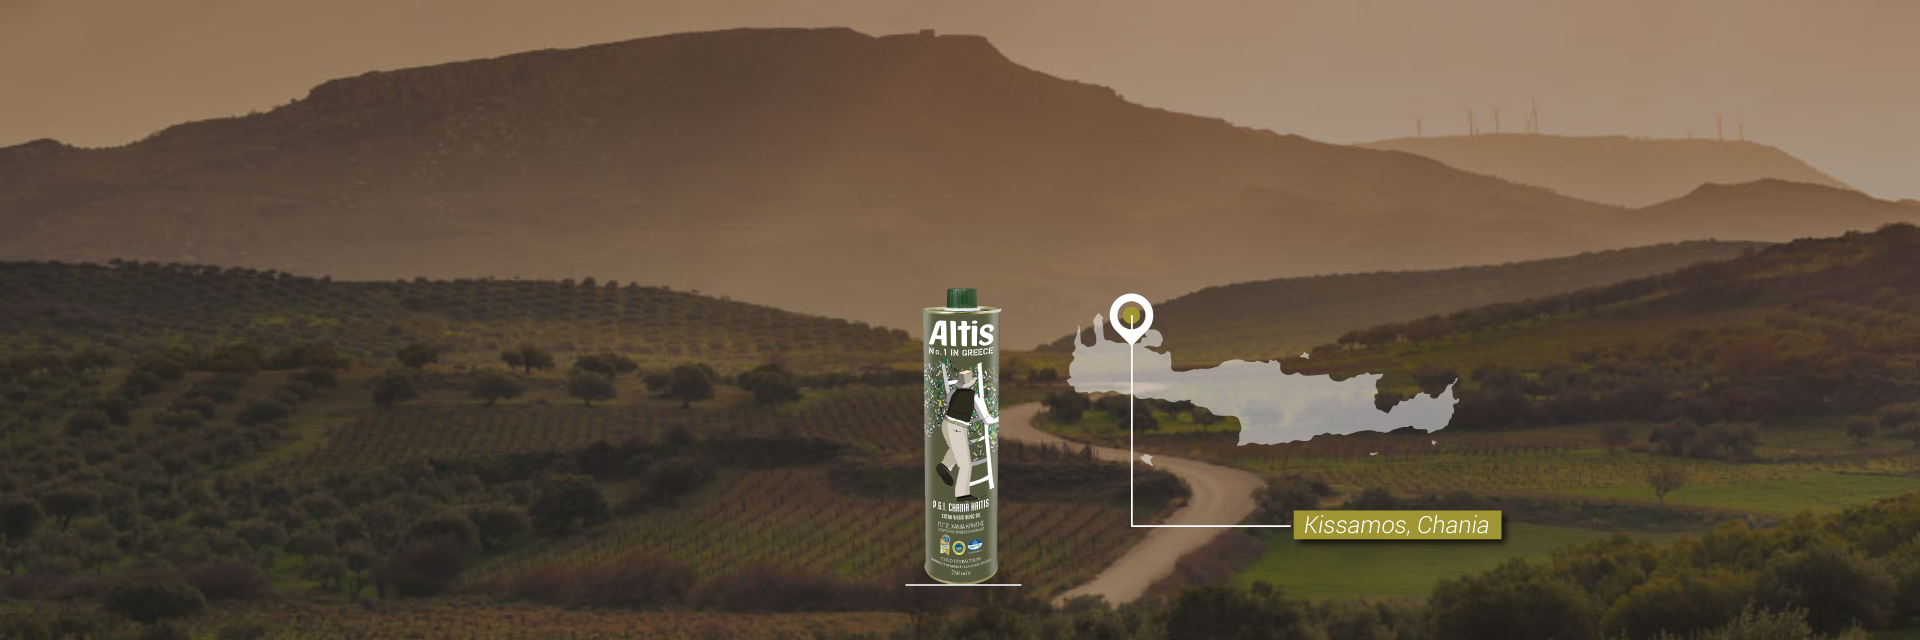 Home Page, Altis - Extra Virgin Olive Oil No.1 in Greece